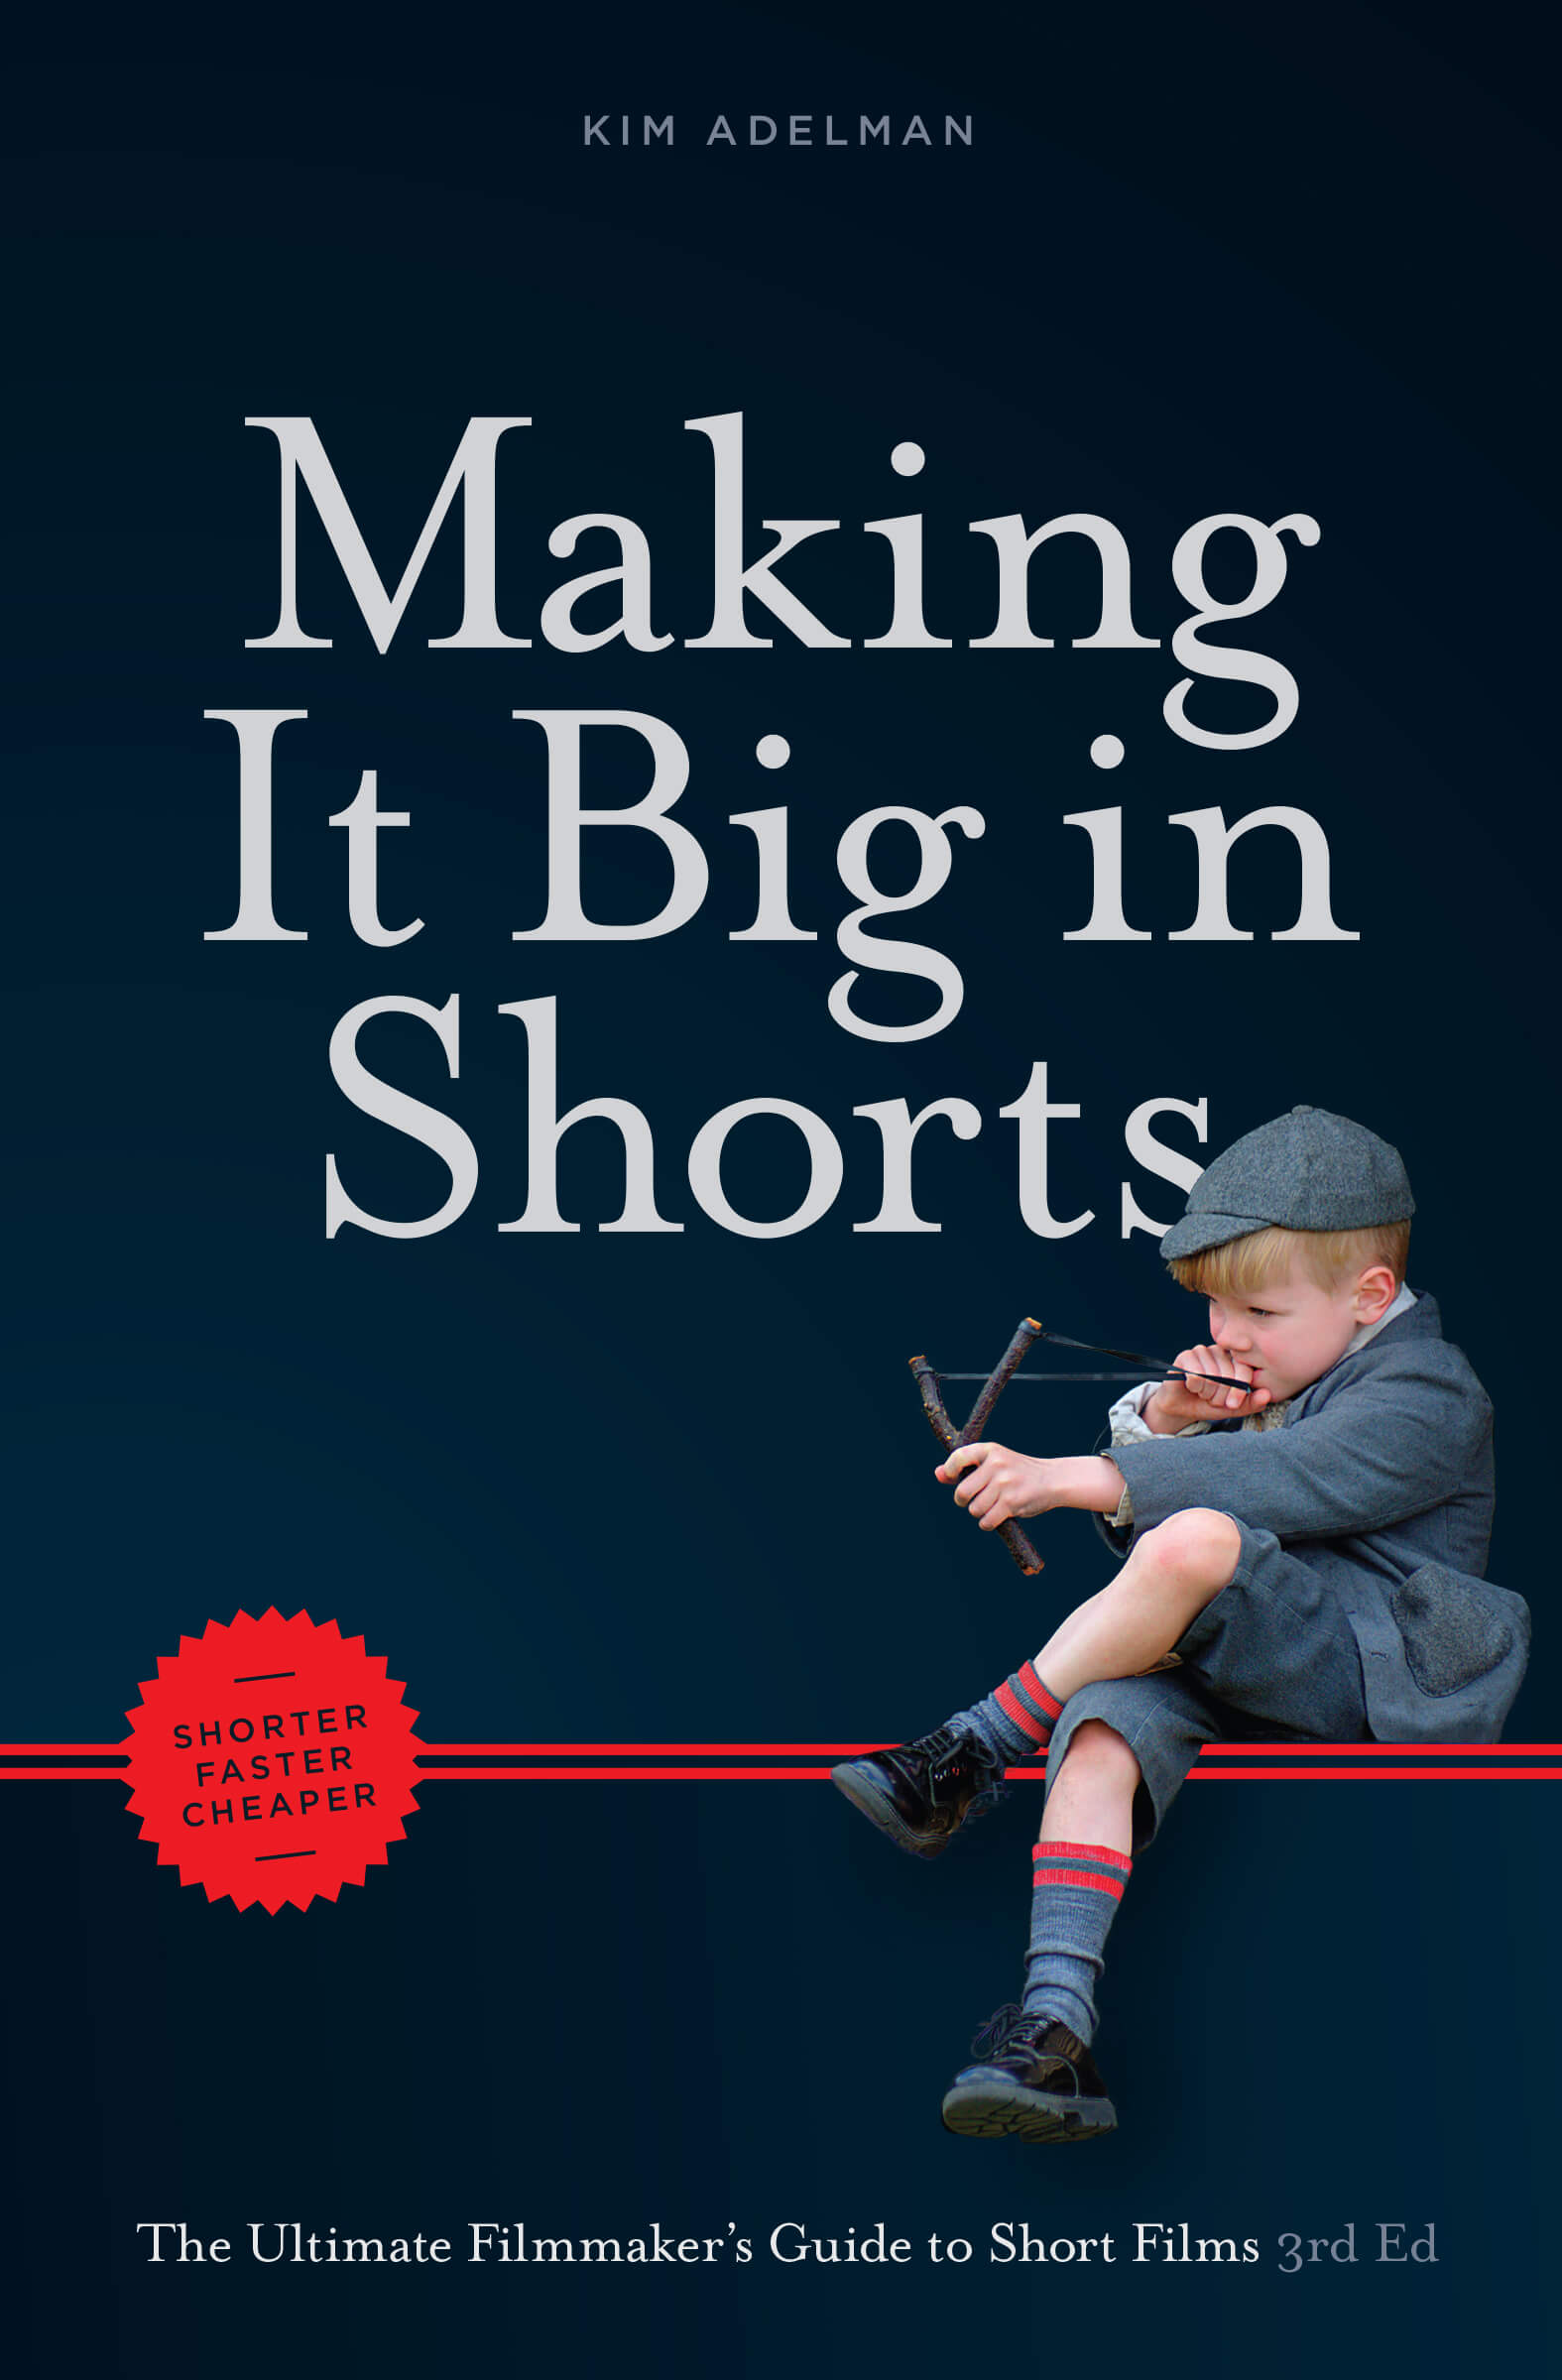 Making it Big in Shorts: Shorter, Faster, Cheaper: The Ultimate Filmmaker’s Guide to Short Films